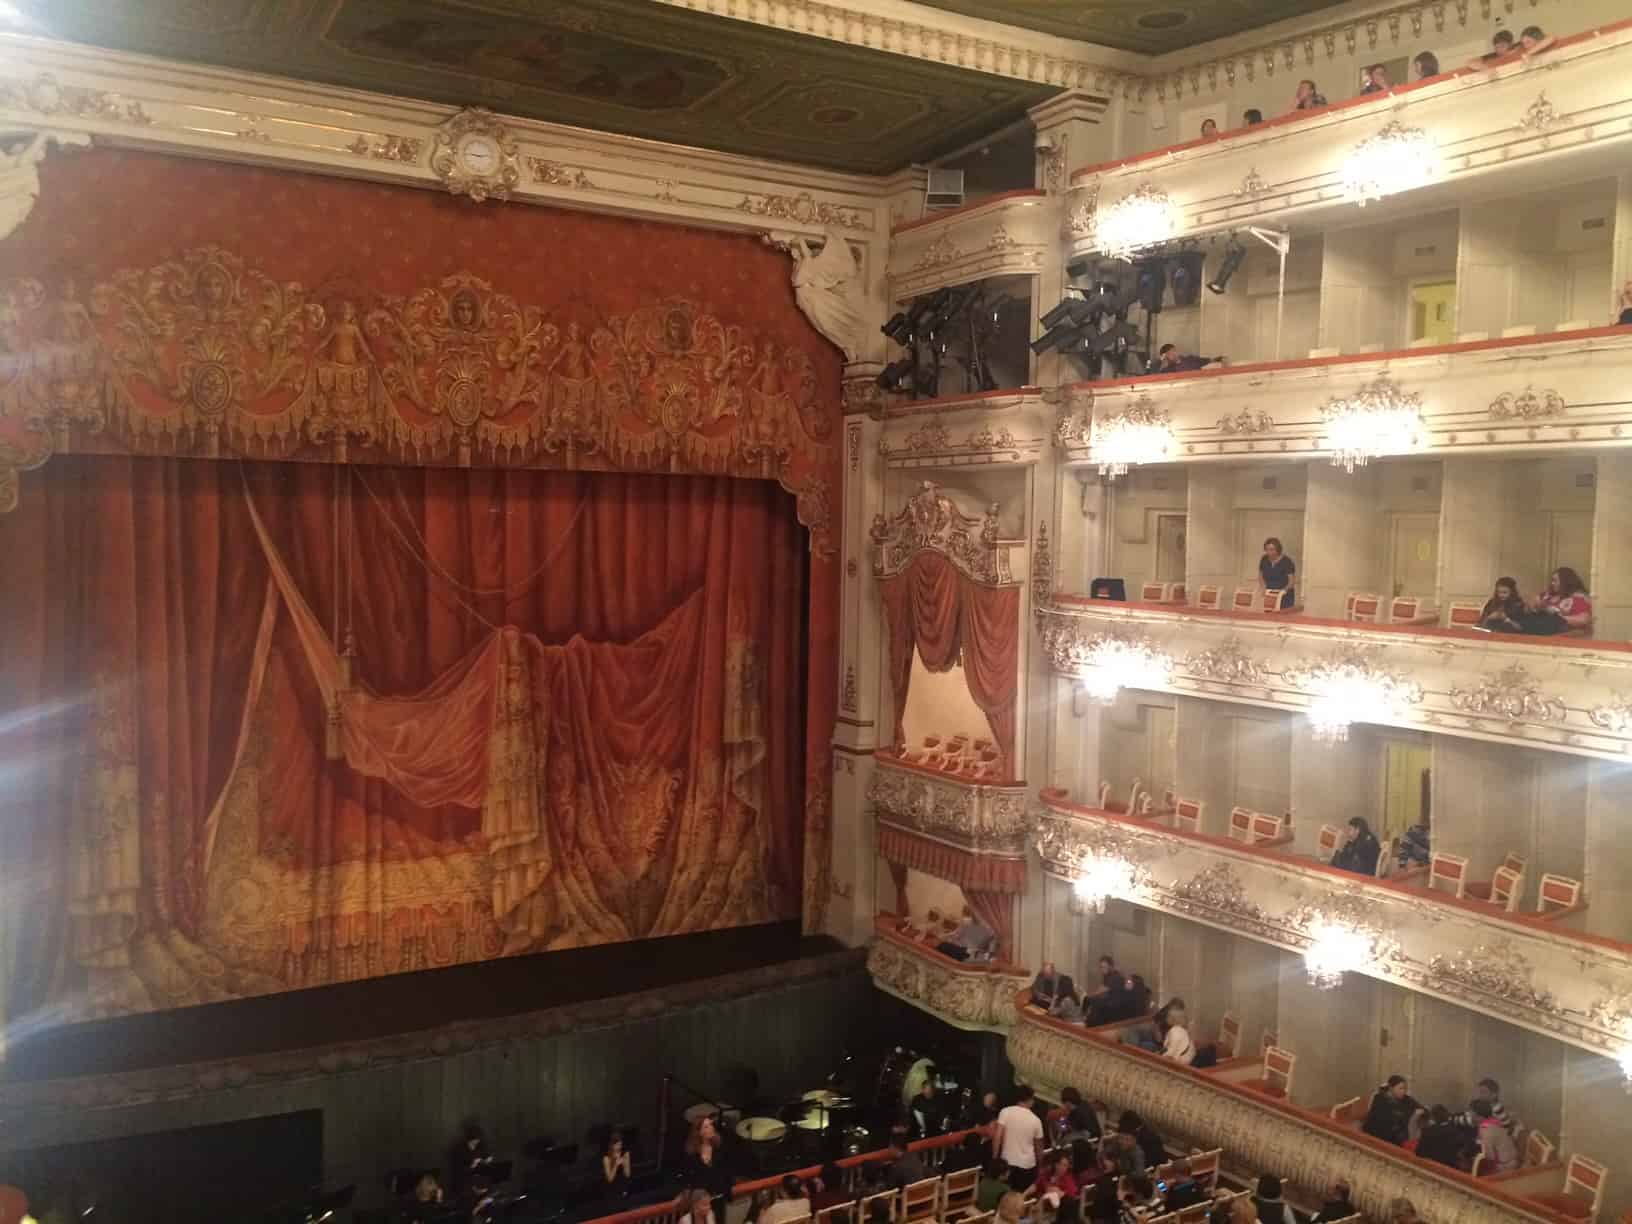 St. Petersburg ballet - where to see ballet in Russia